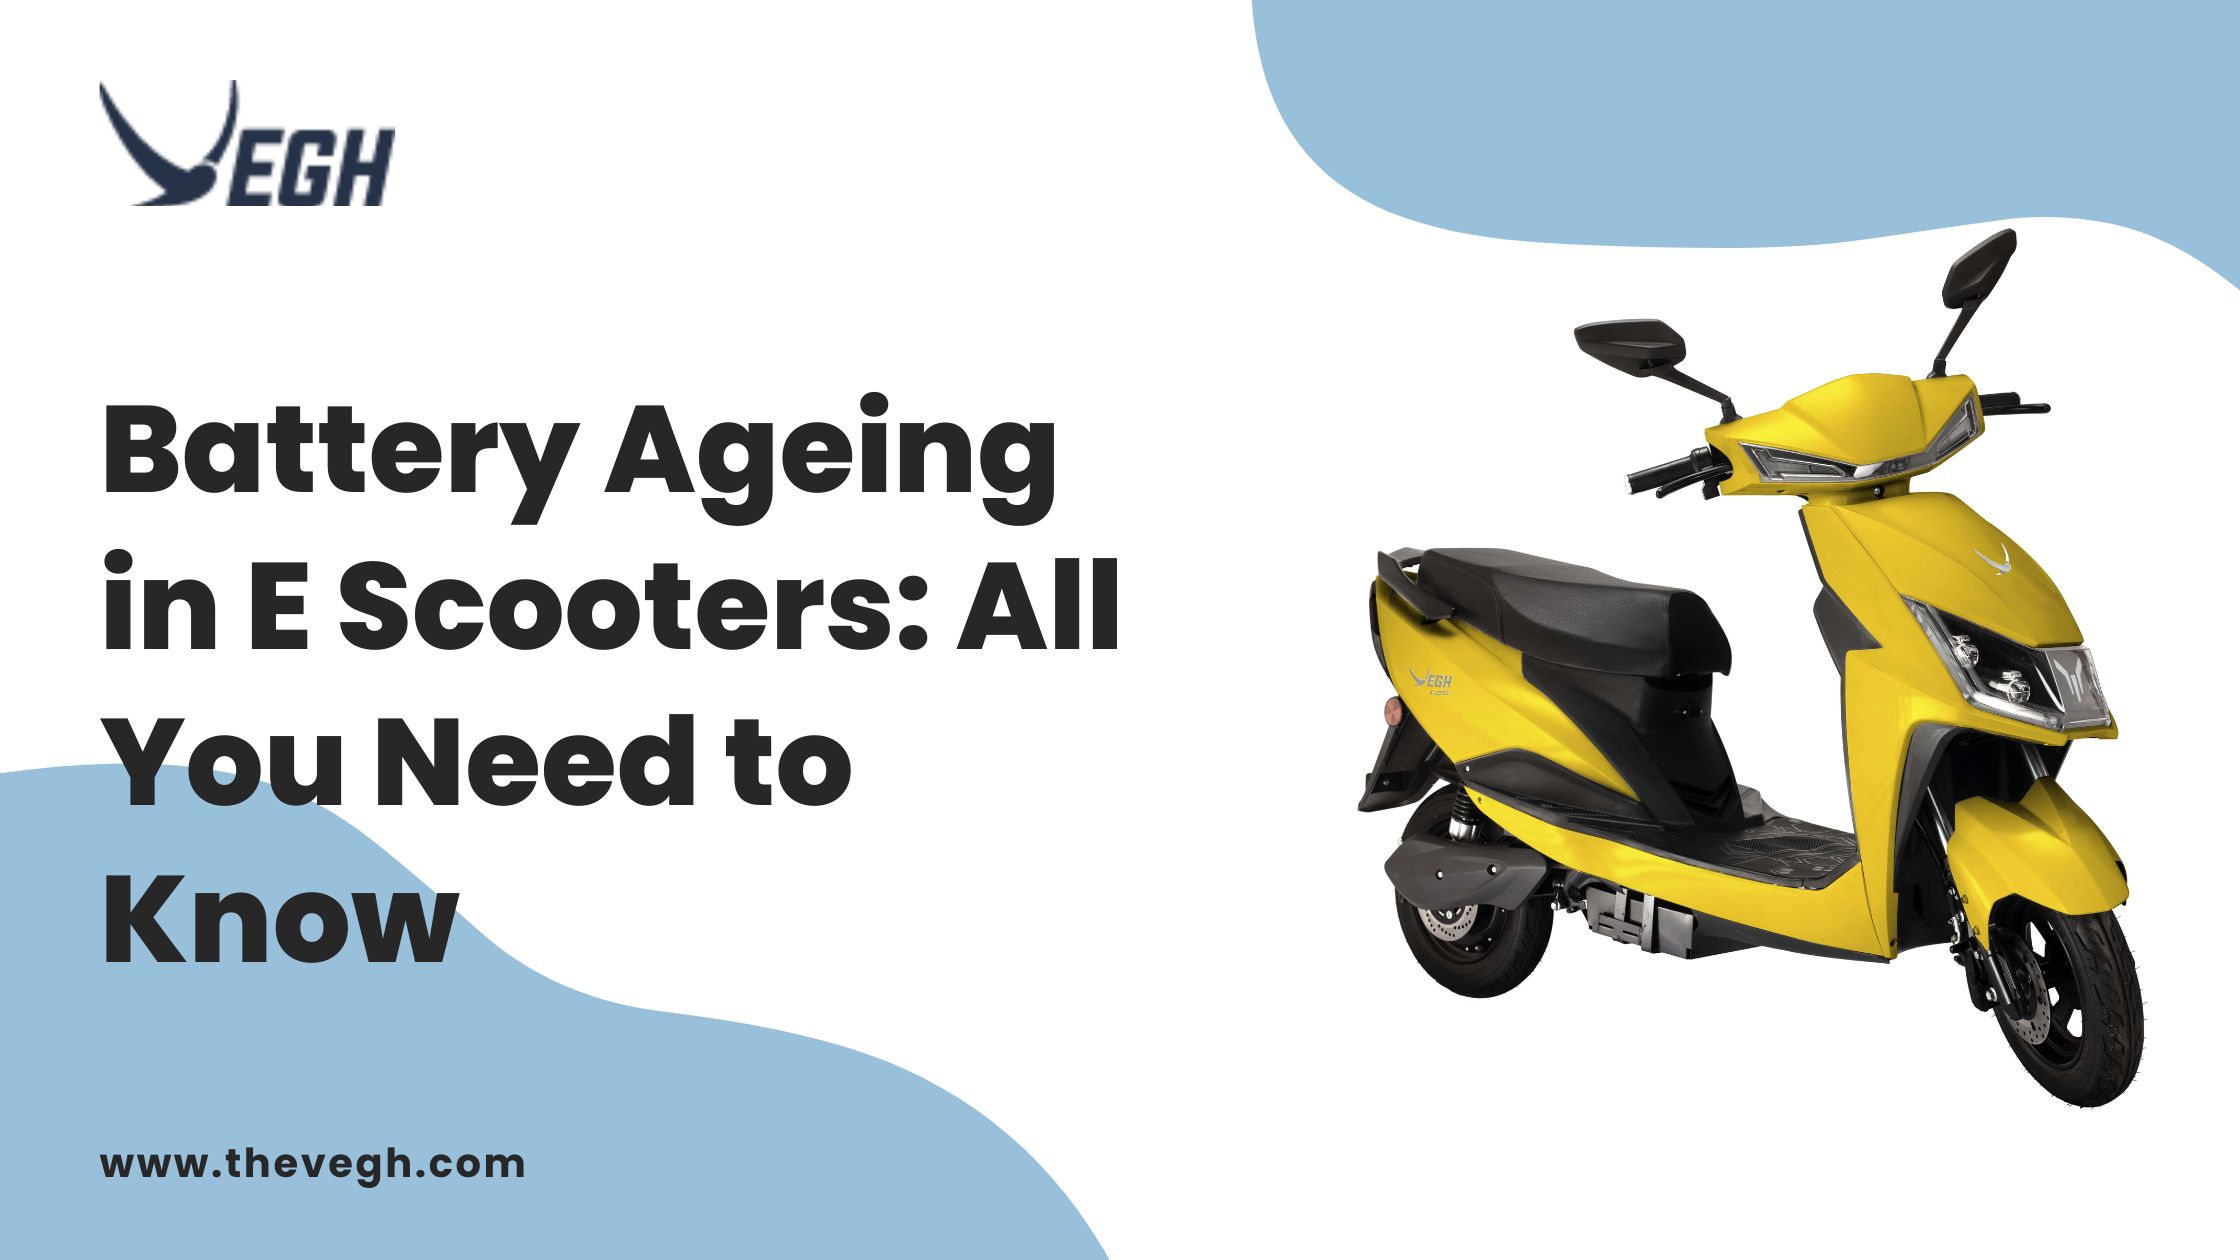 Battery Ageing in E Scooters: All You Need to Know